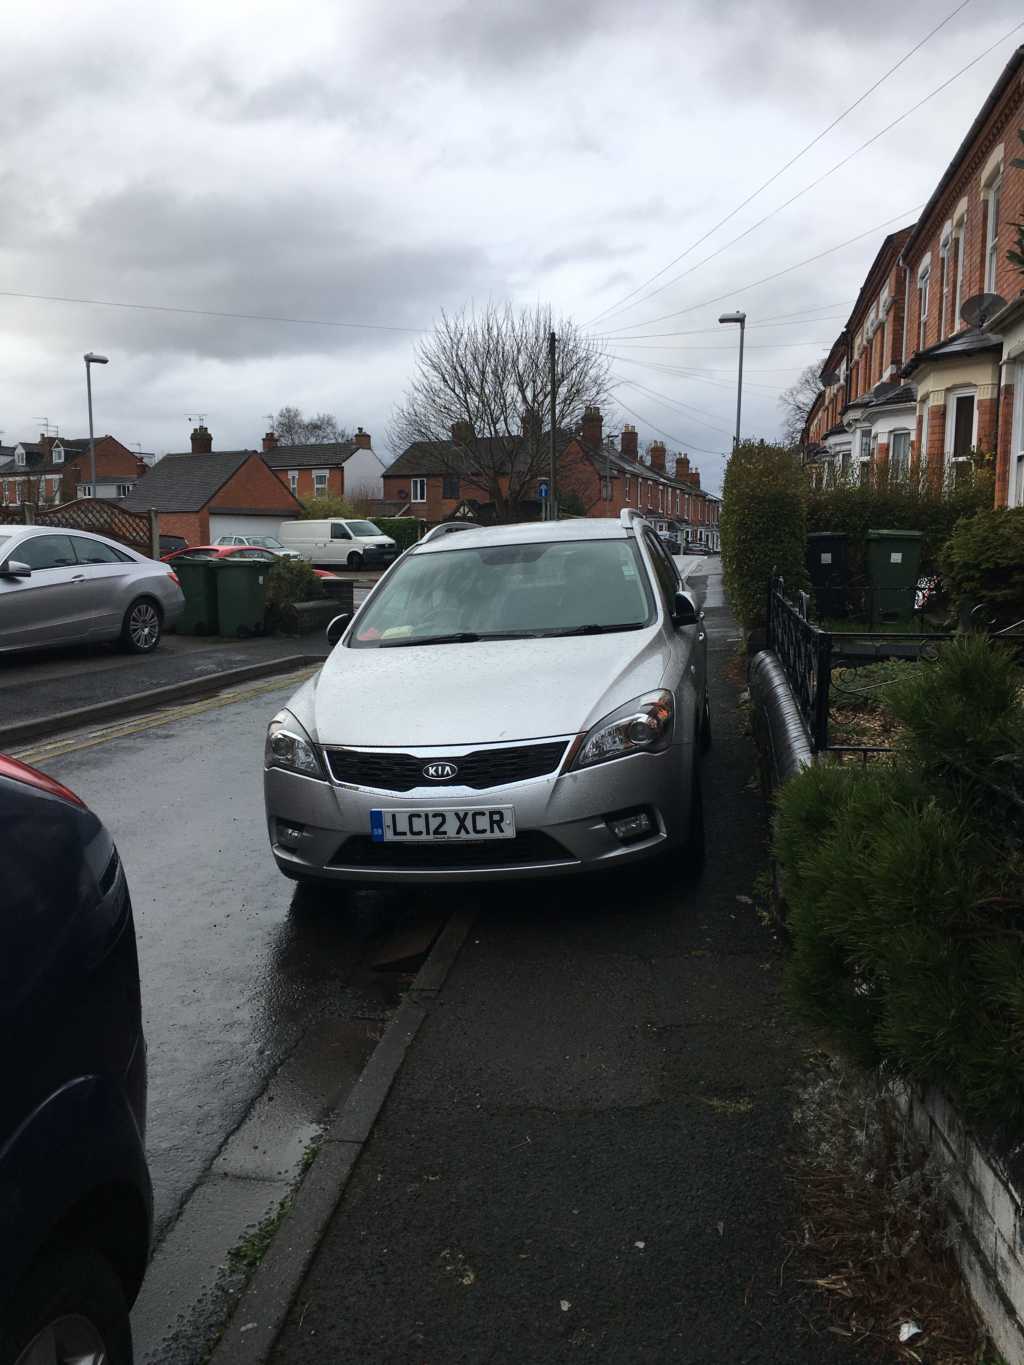 LC12 XCR is an Inconsiderate Parker